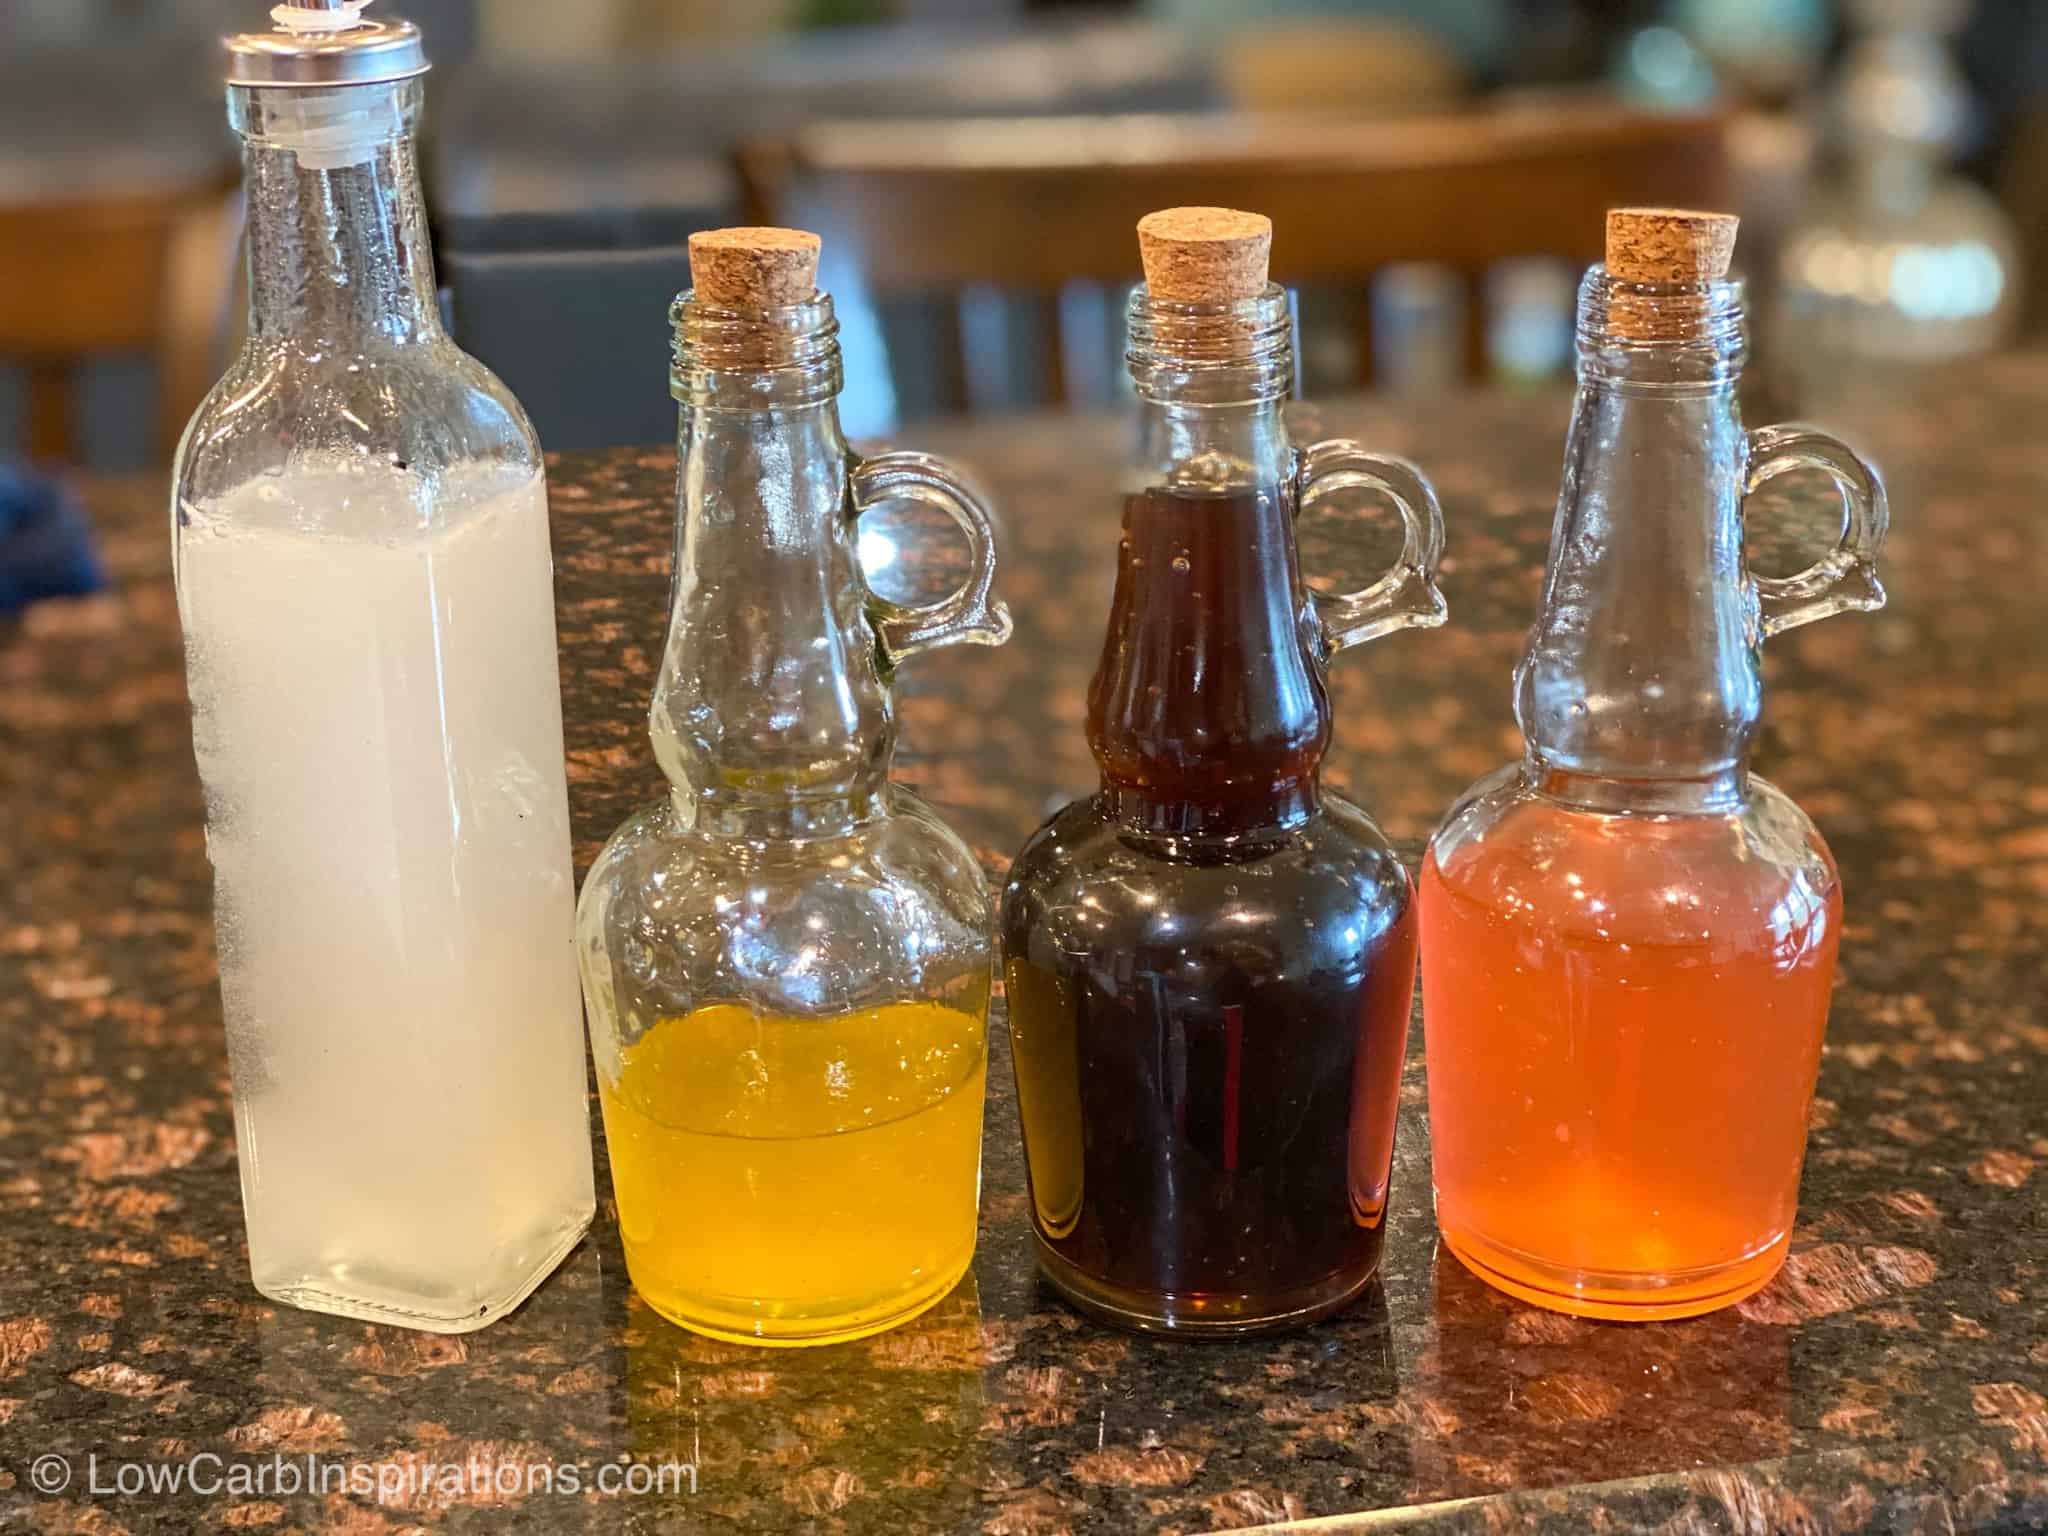 Multiple sugar free syrups in one photo